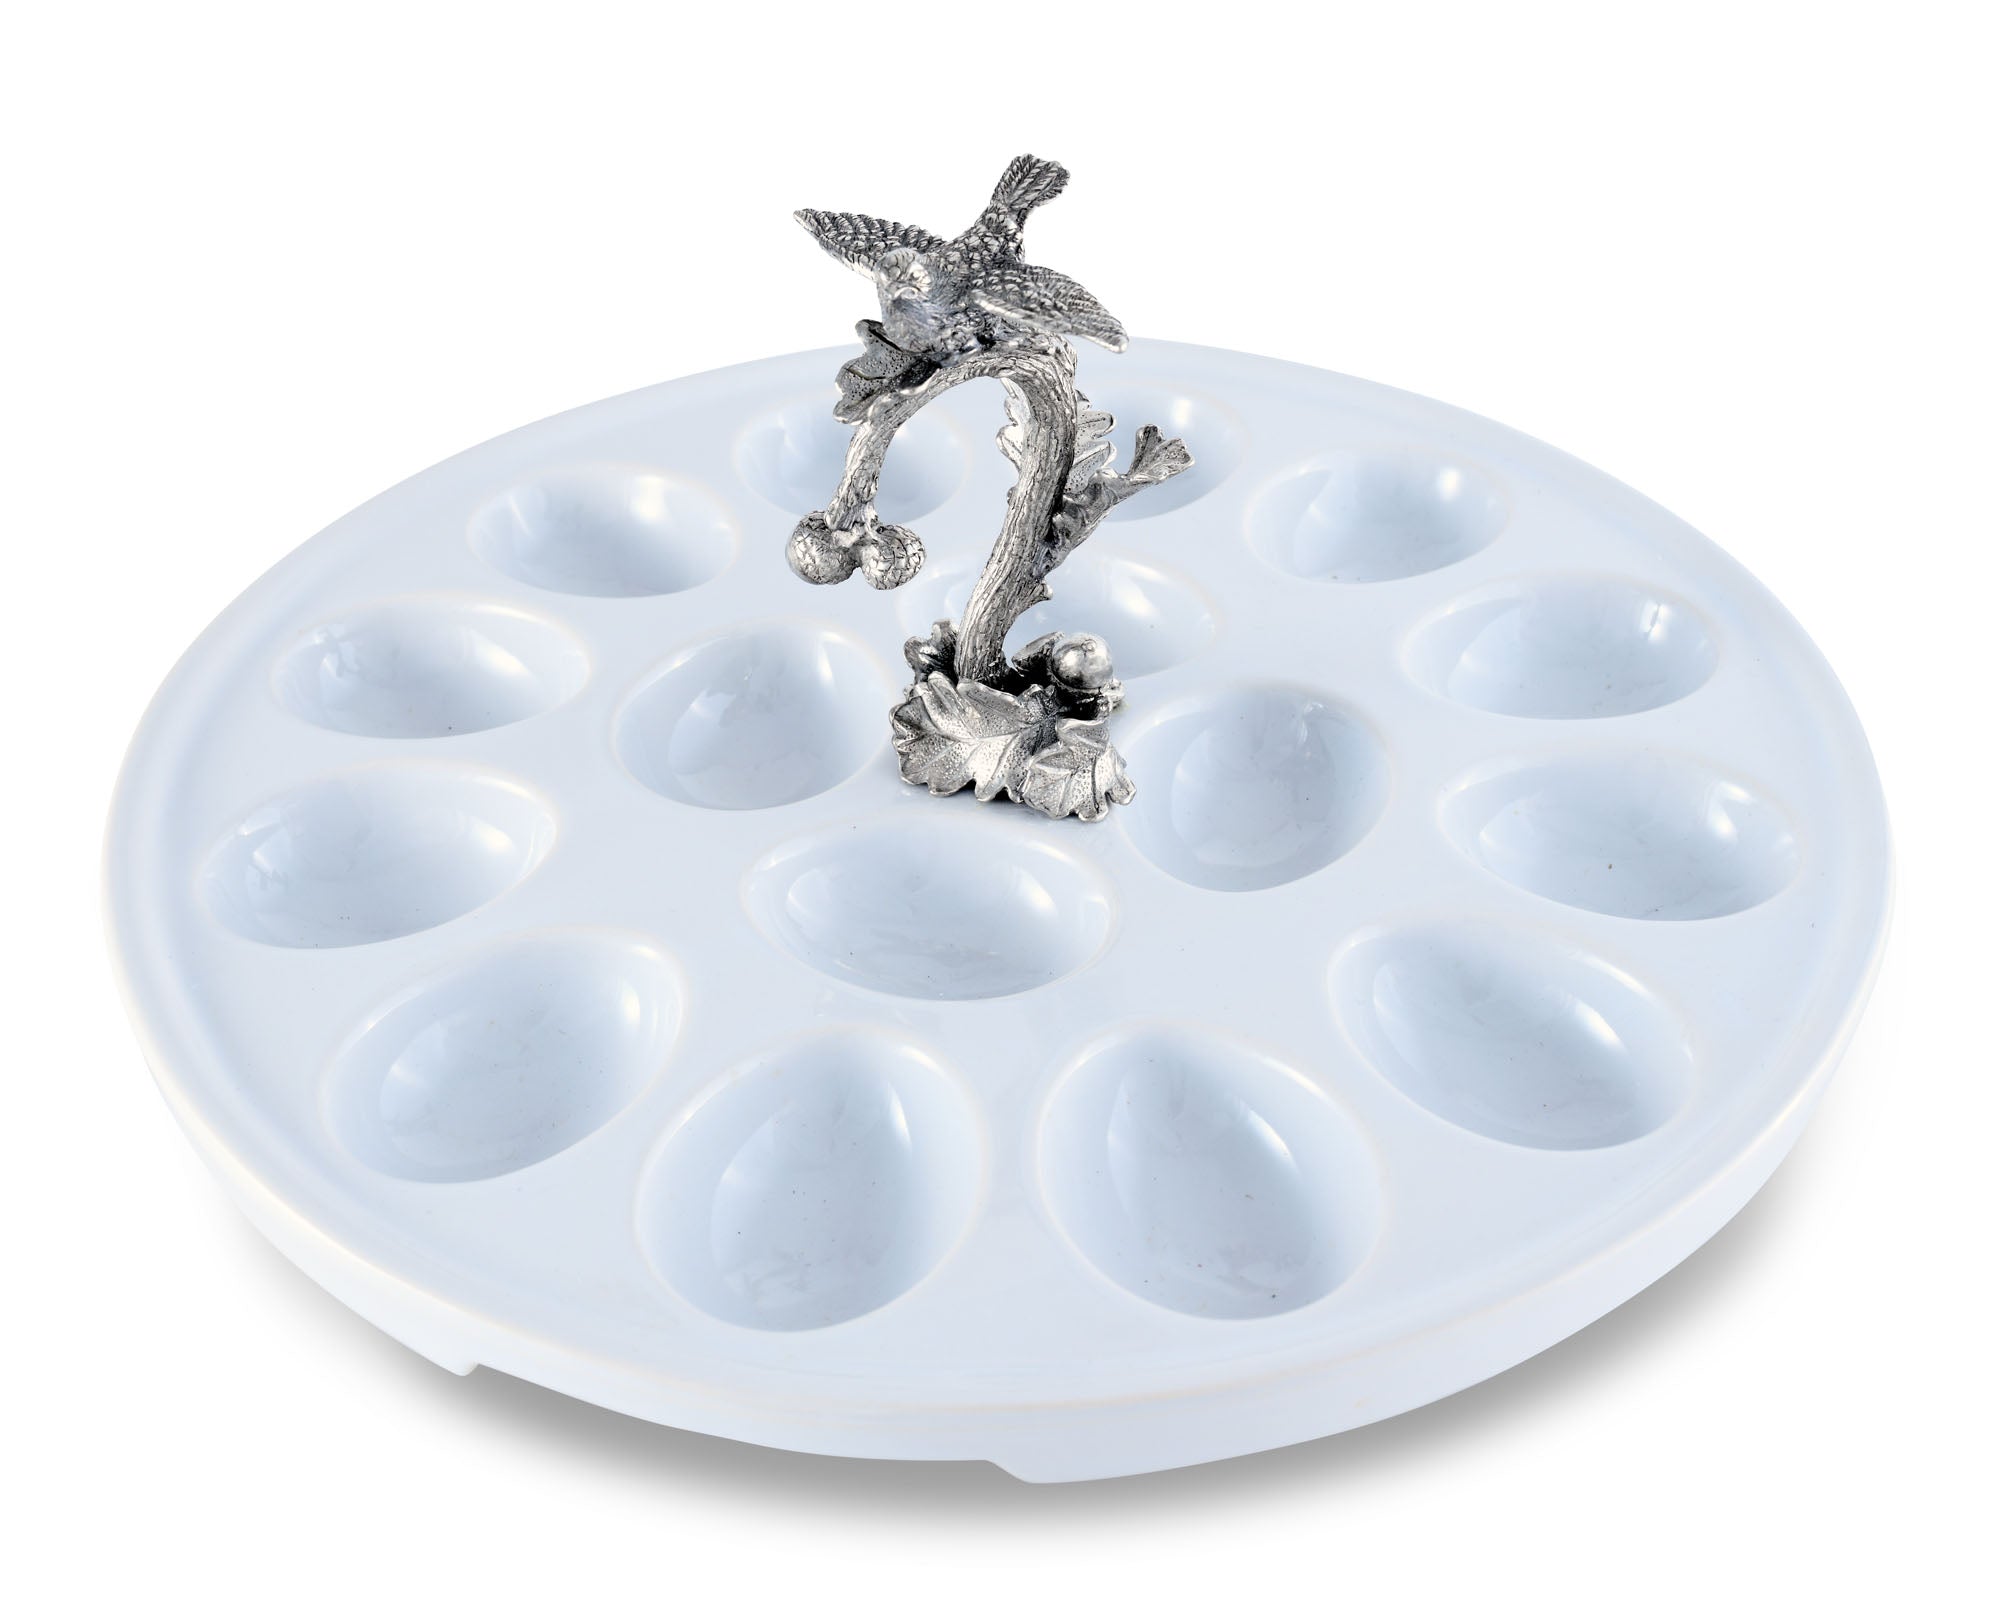 Vagabond House Deviled Egg Tray with Pewter Song Bird Handle Product Image